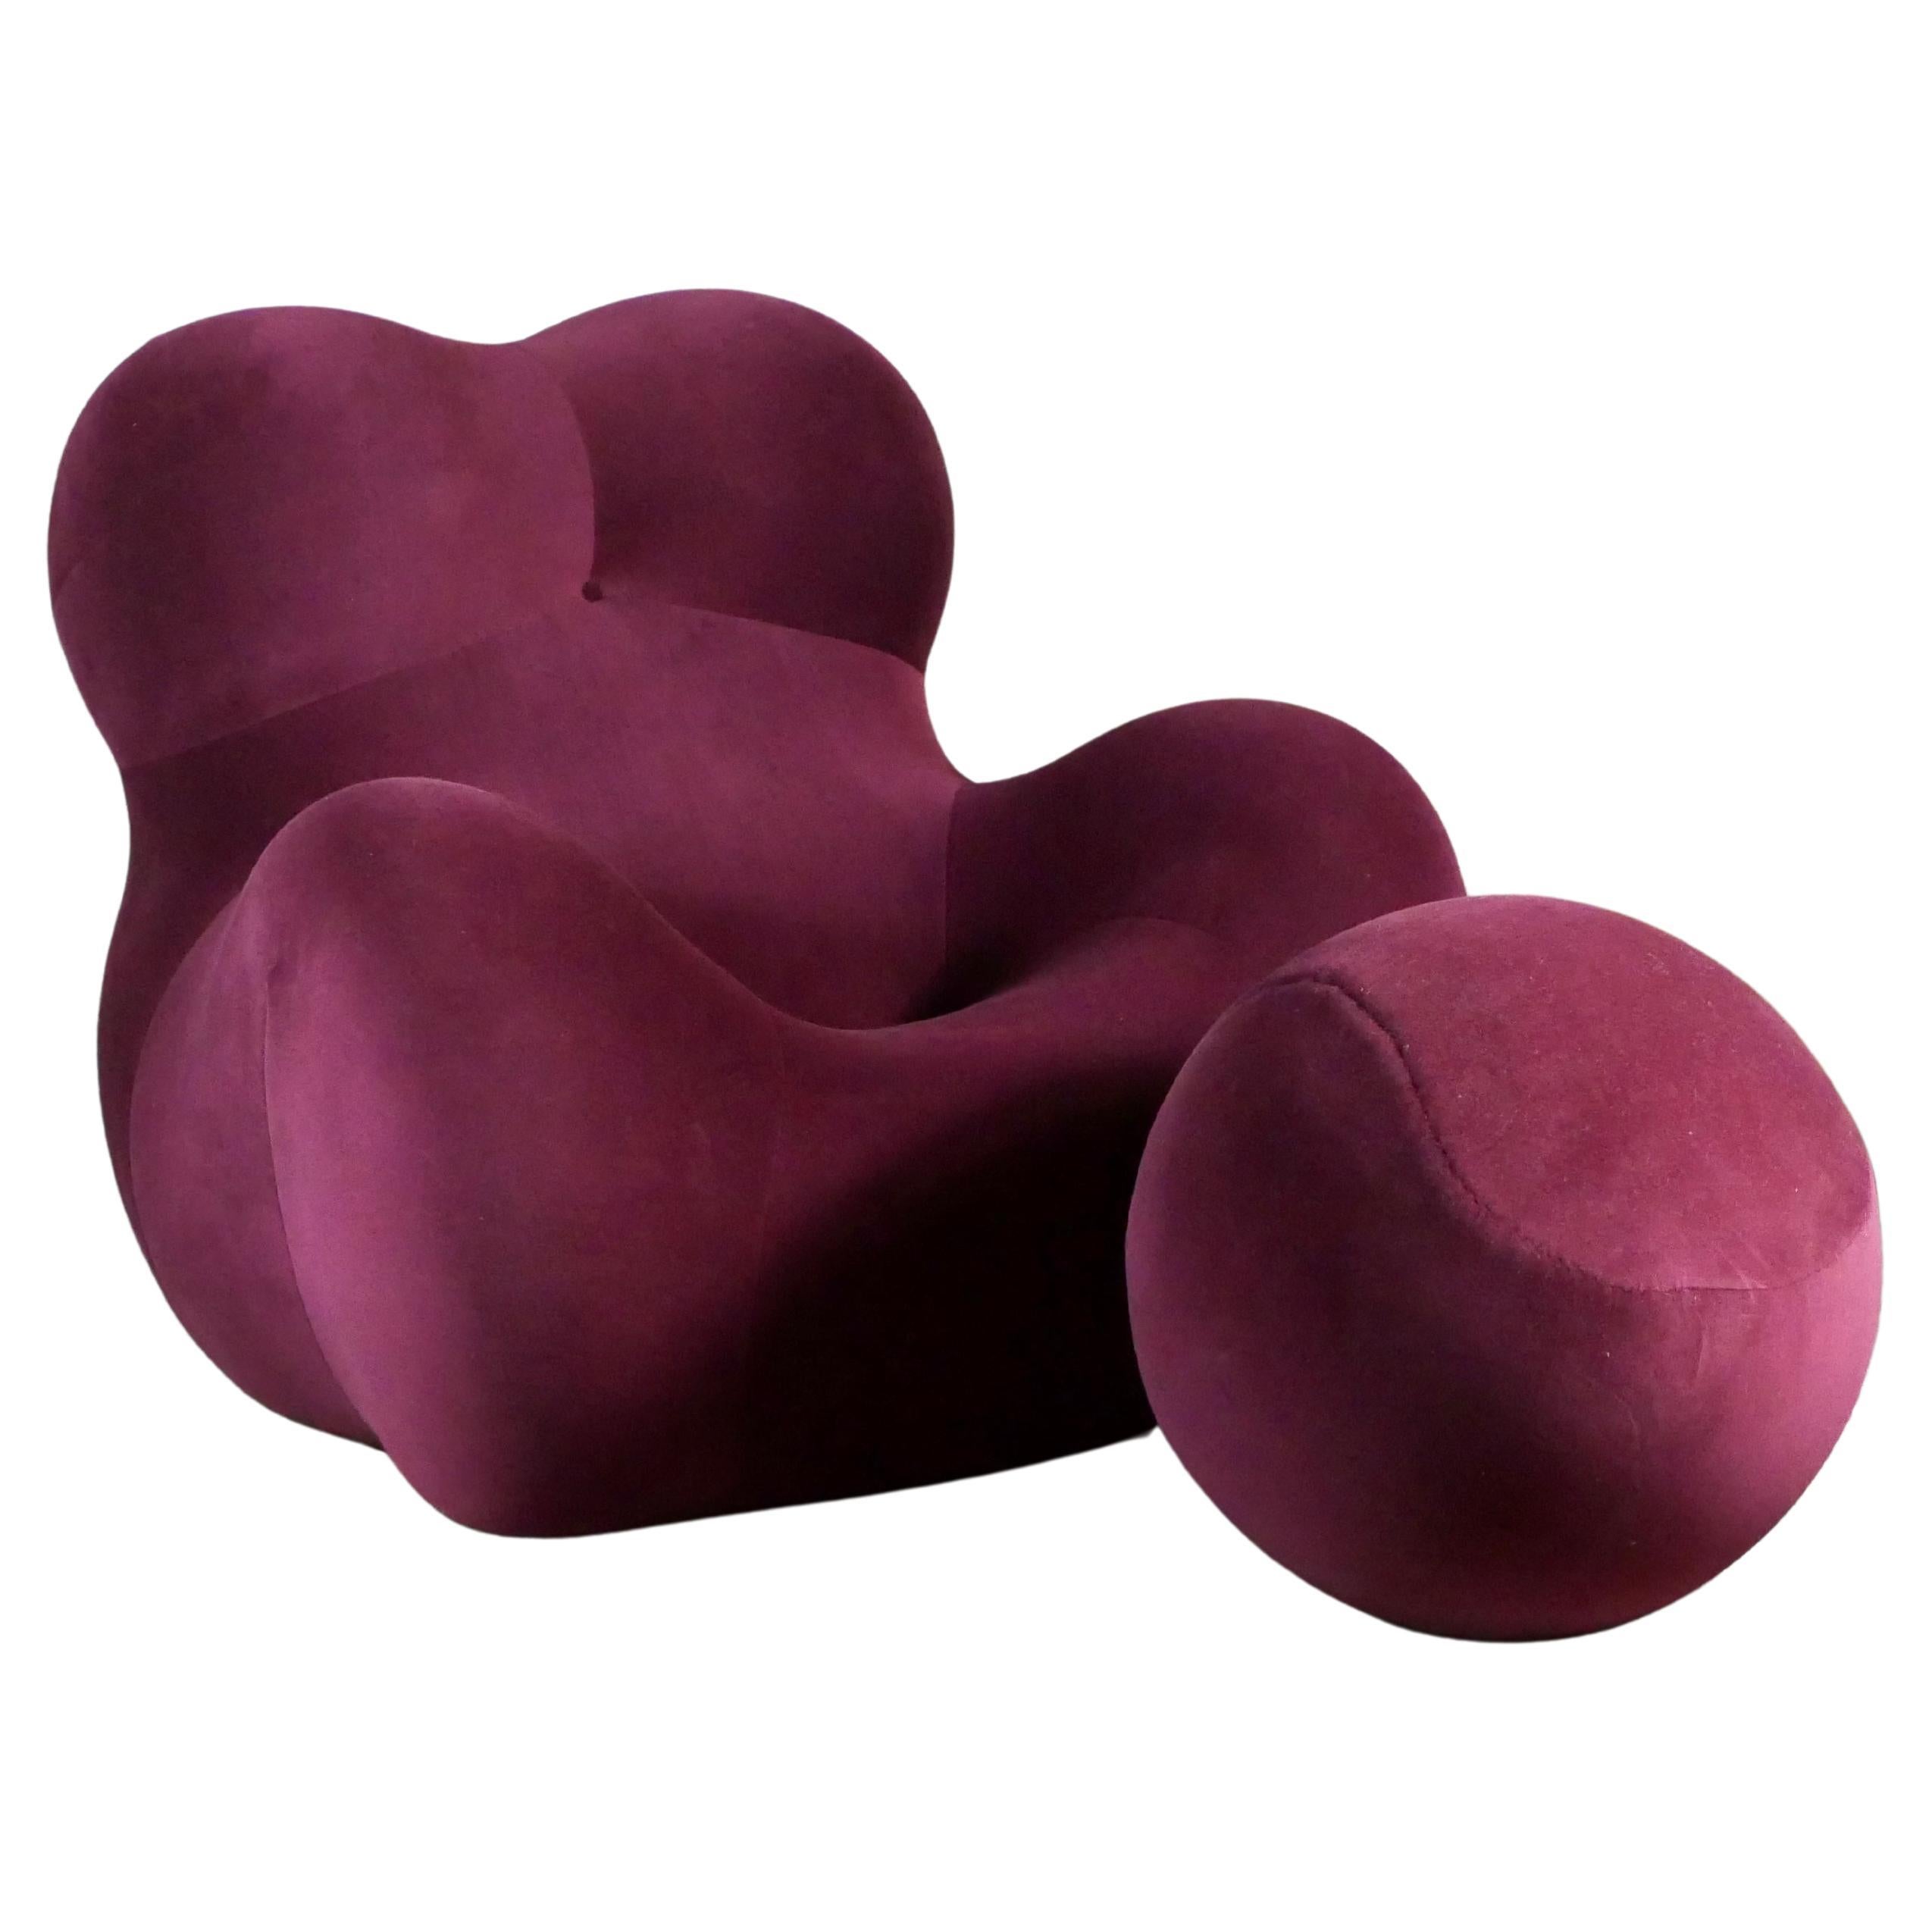 La Mamma set, armchair and ottoman UP5 and 6 by Gaetano Pesce for B&B Italia For Sale